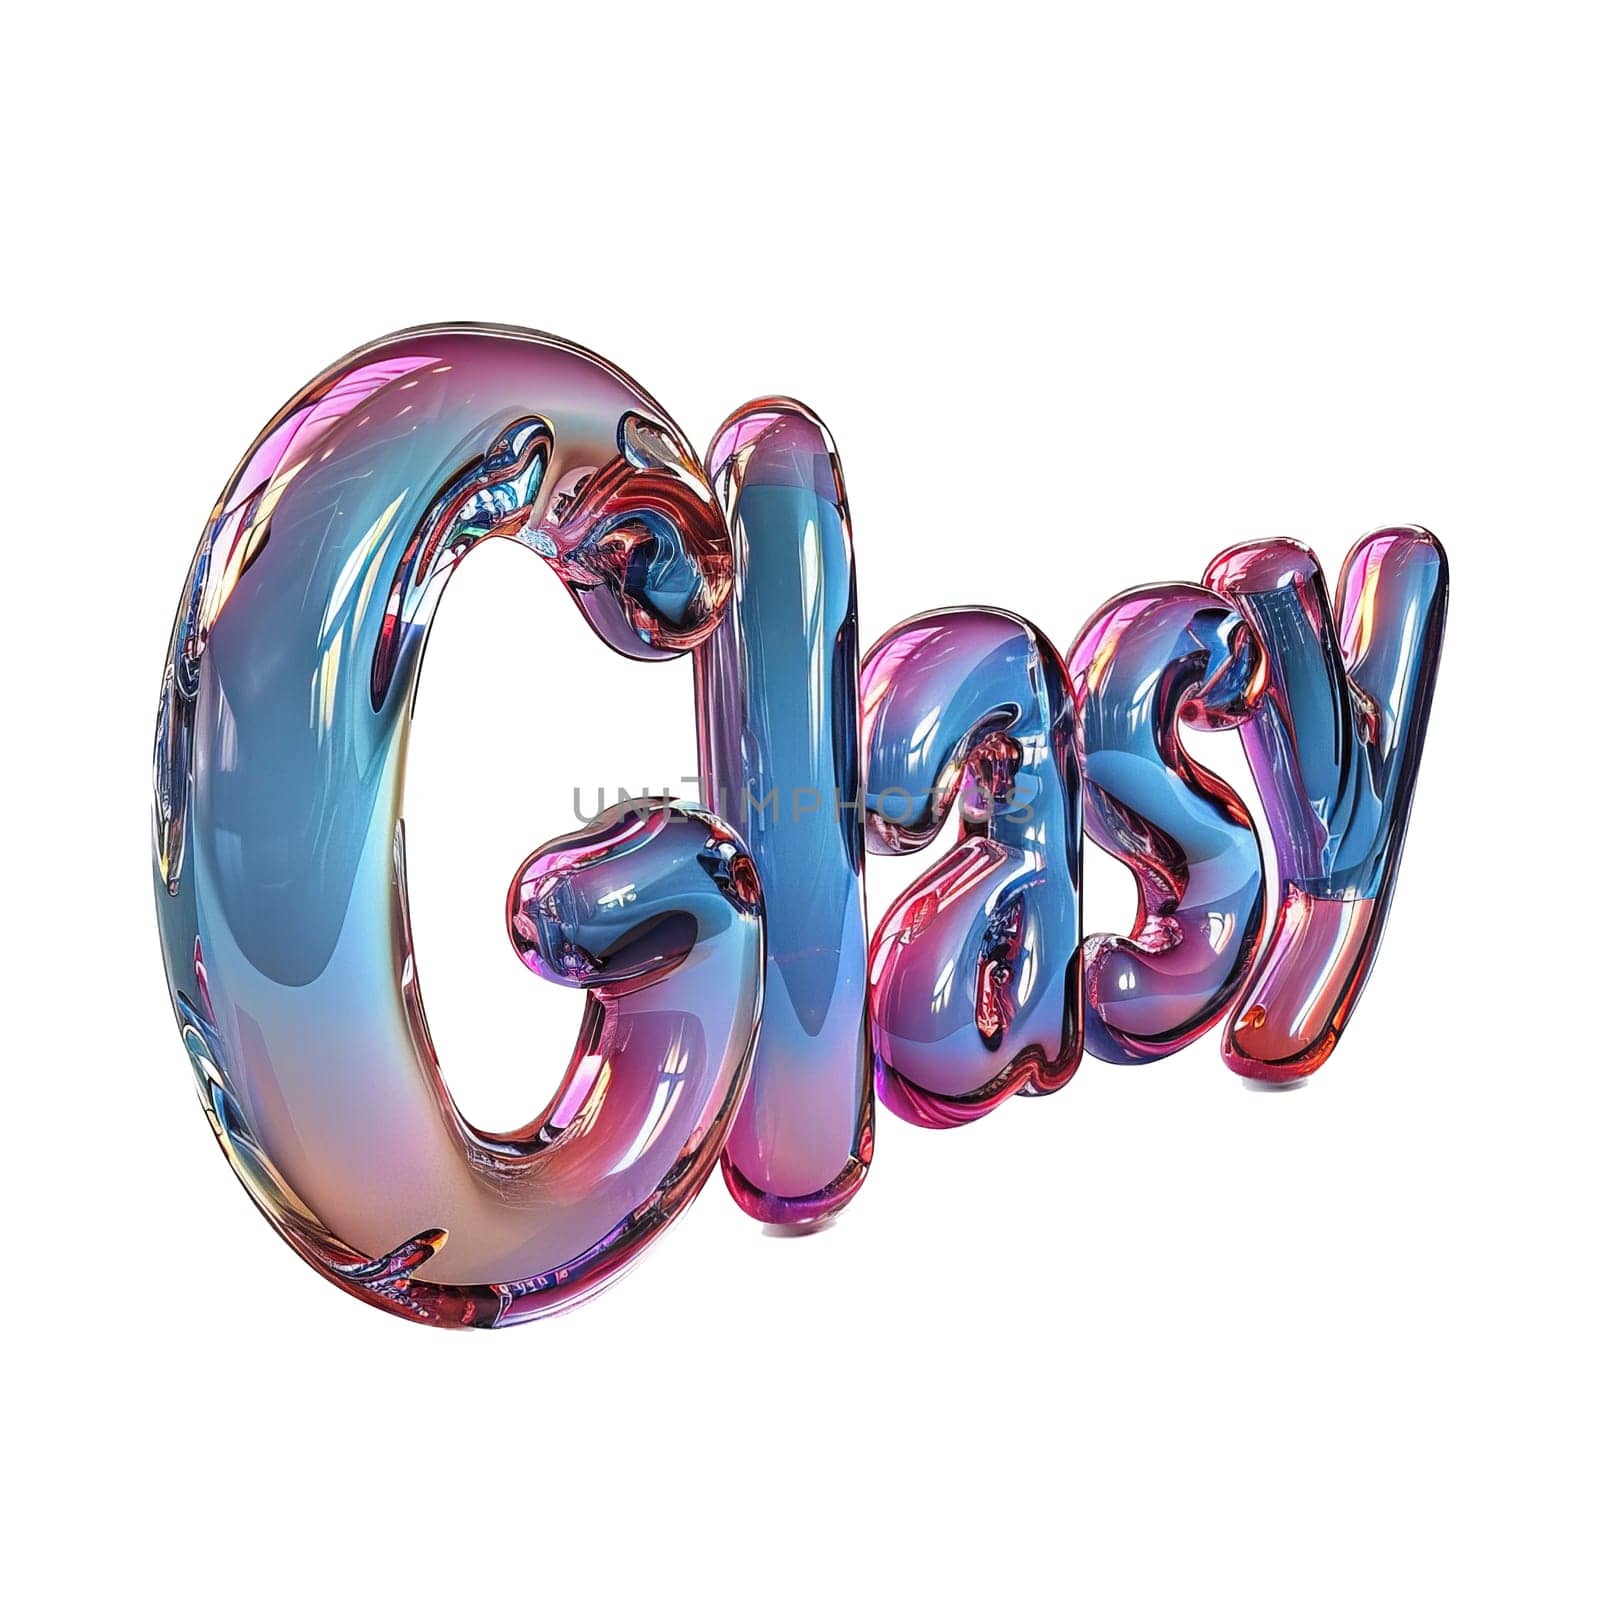 glassy pink and blue "Glasy" for logo in the style of neumorphism, soft natural lighting simple and elegant space, close-up, super high detaill by mr-tigga